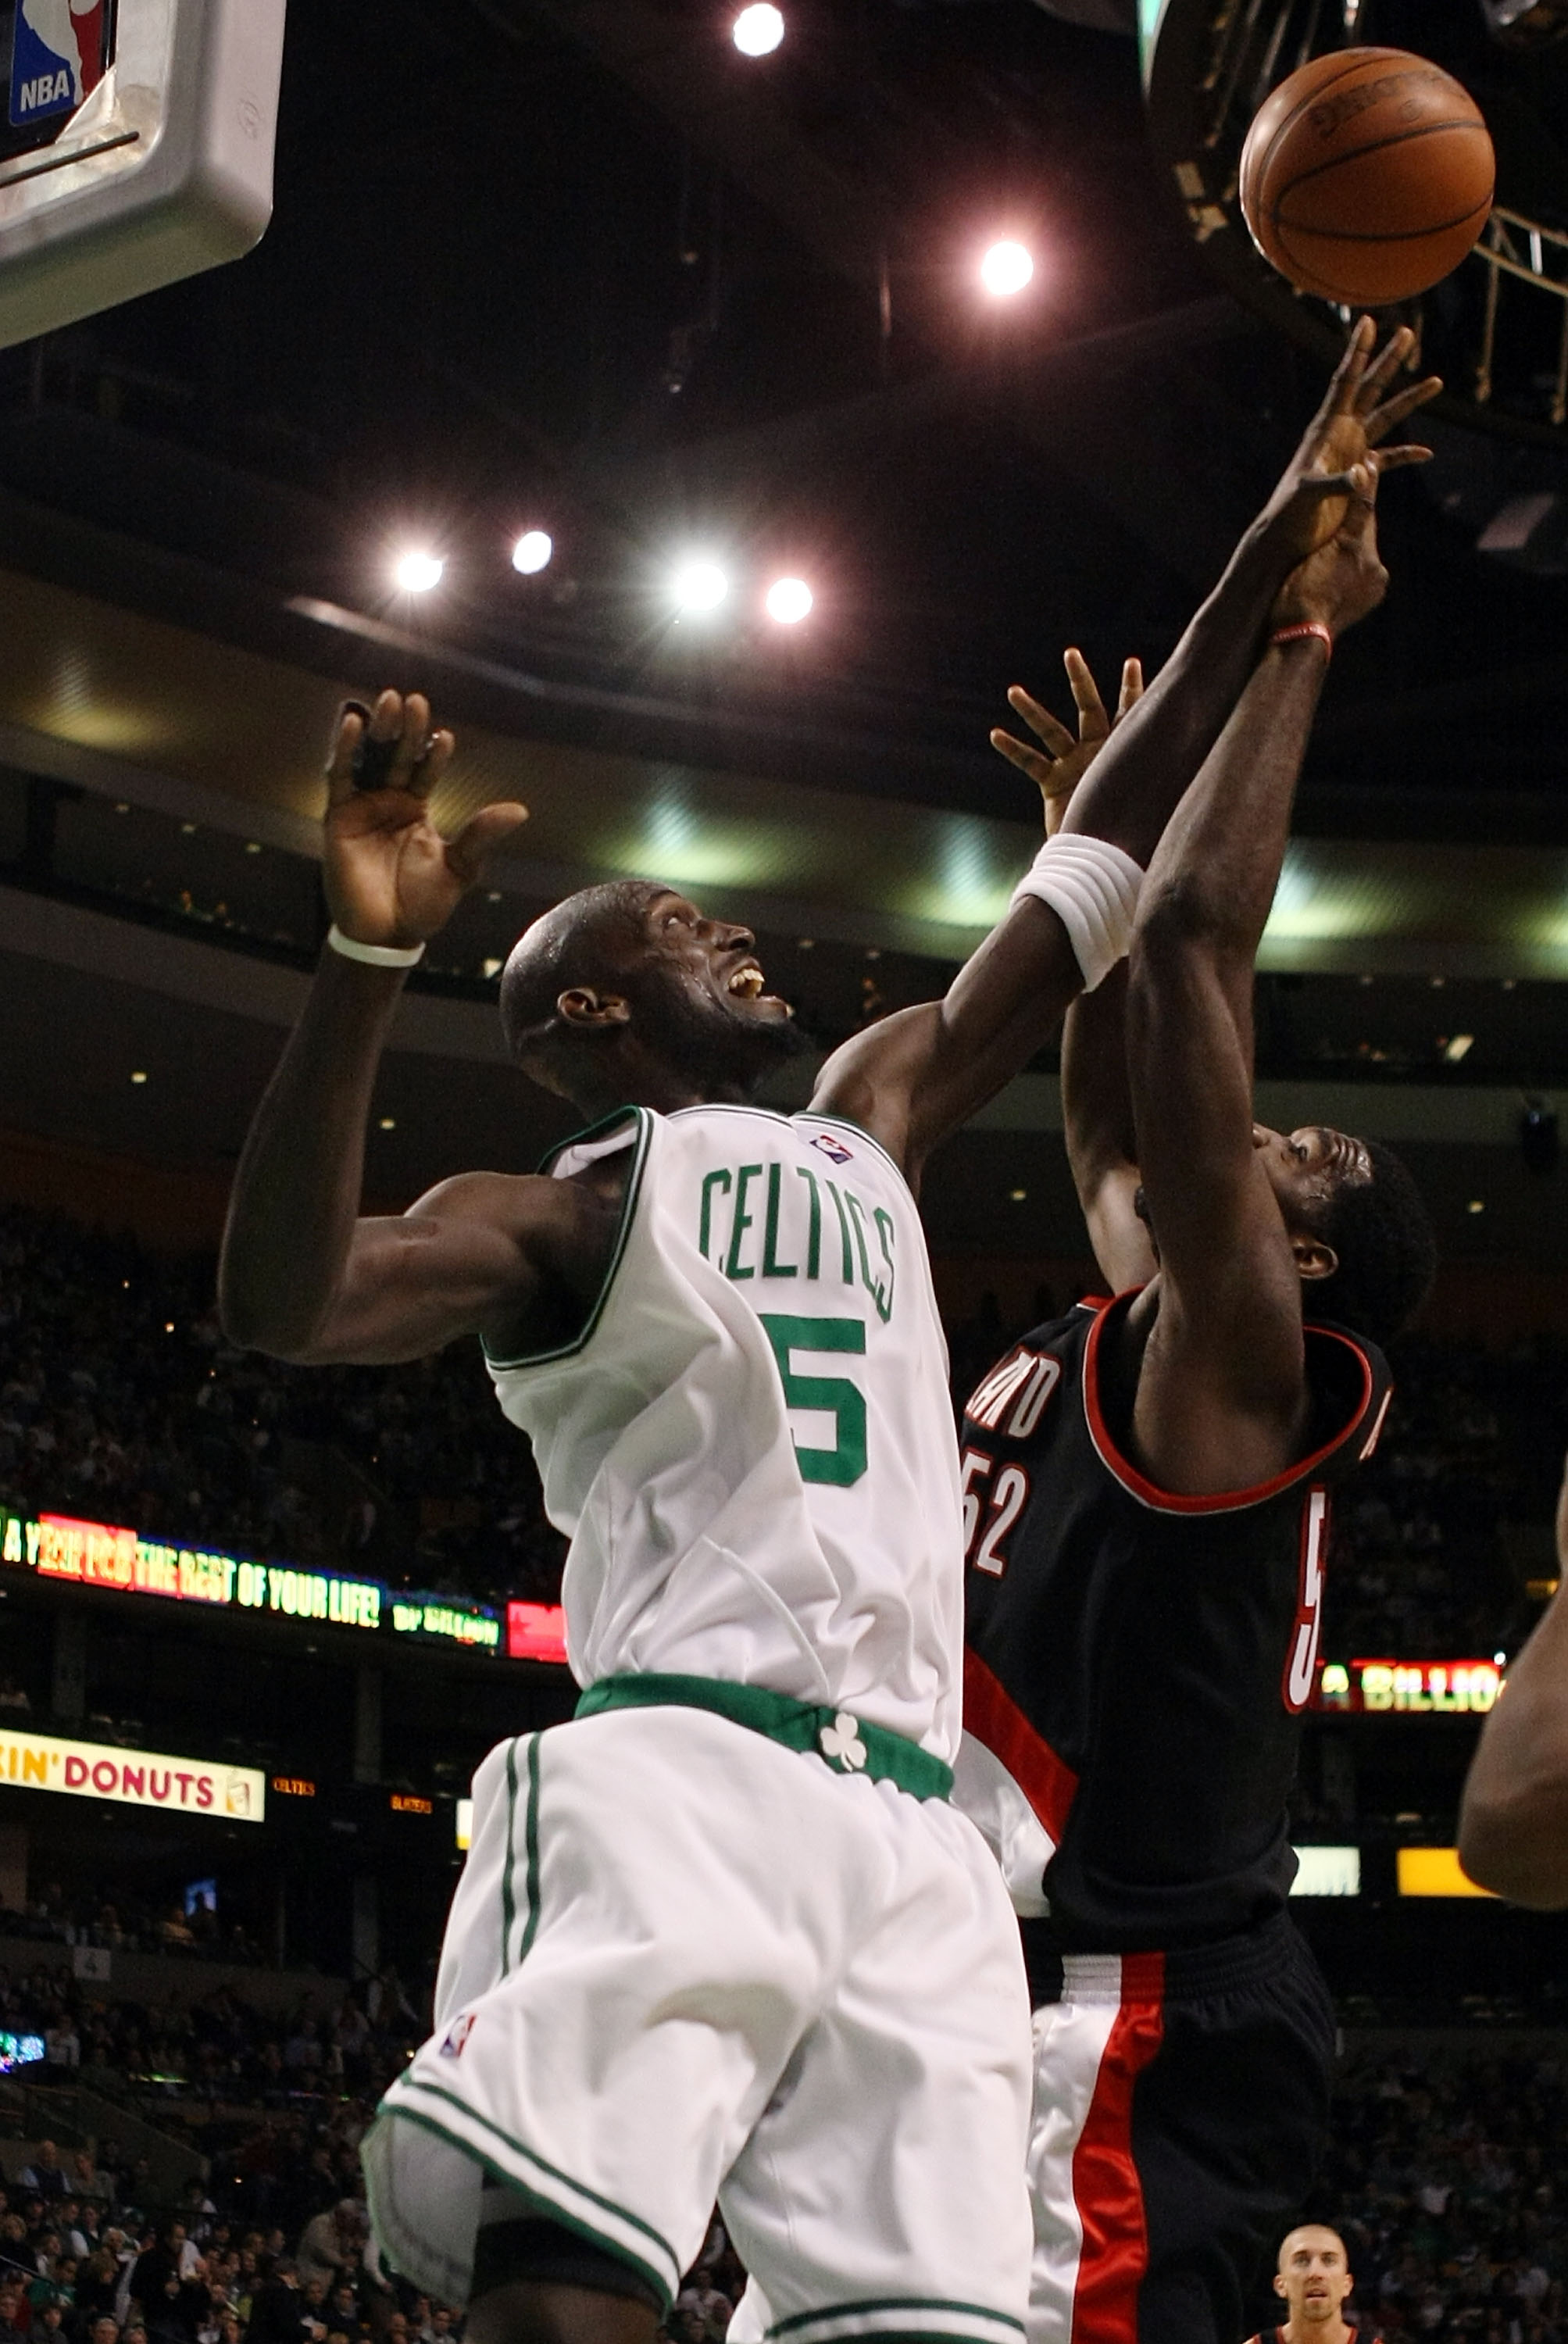 BOSTON - DECEMBER 05:  Kevin Garnett #5 of the Boston Celtics tries to block a shot from Greg Oden #52 of the Portland Trail Blazers on December 5, 2008 at TD Banknorth Garden in Boston, Massachusetts. The Celtics defeated the Trail Blazers 93-78.  NOTE T